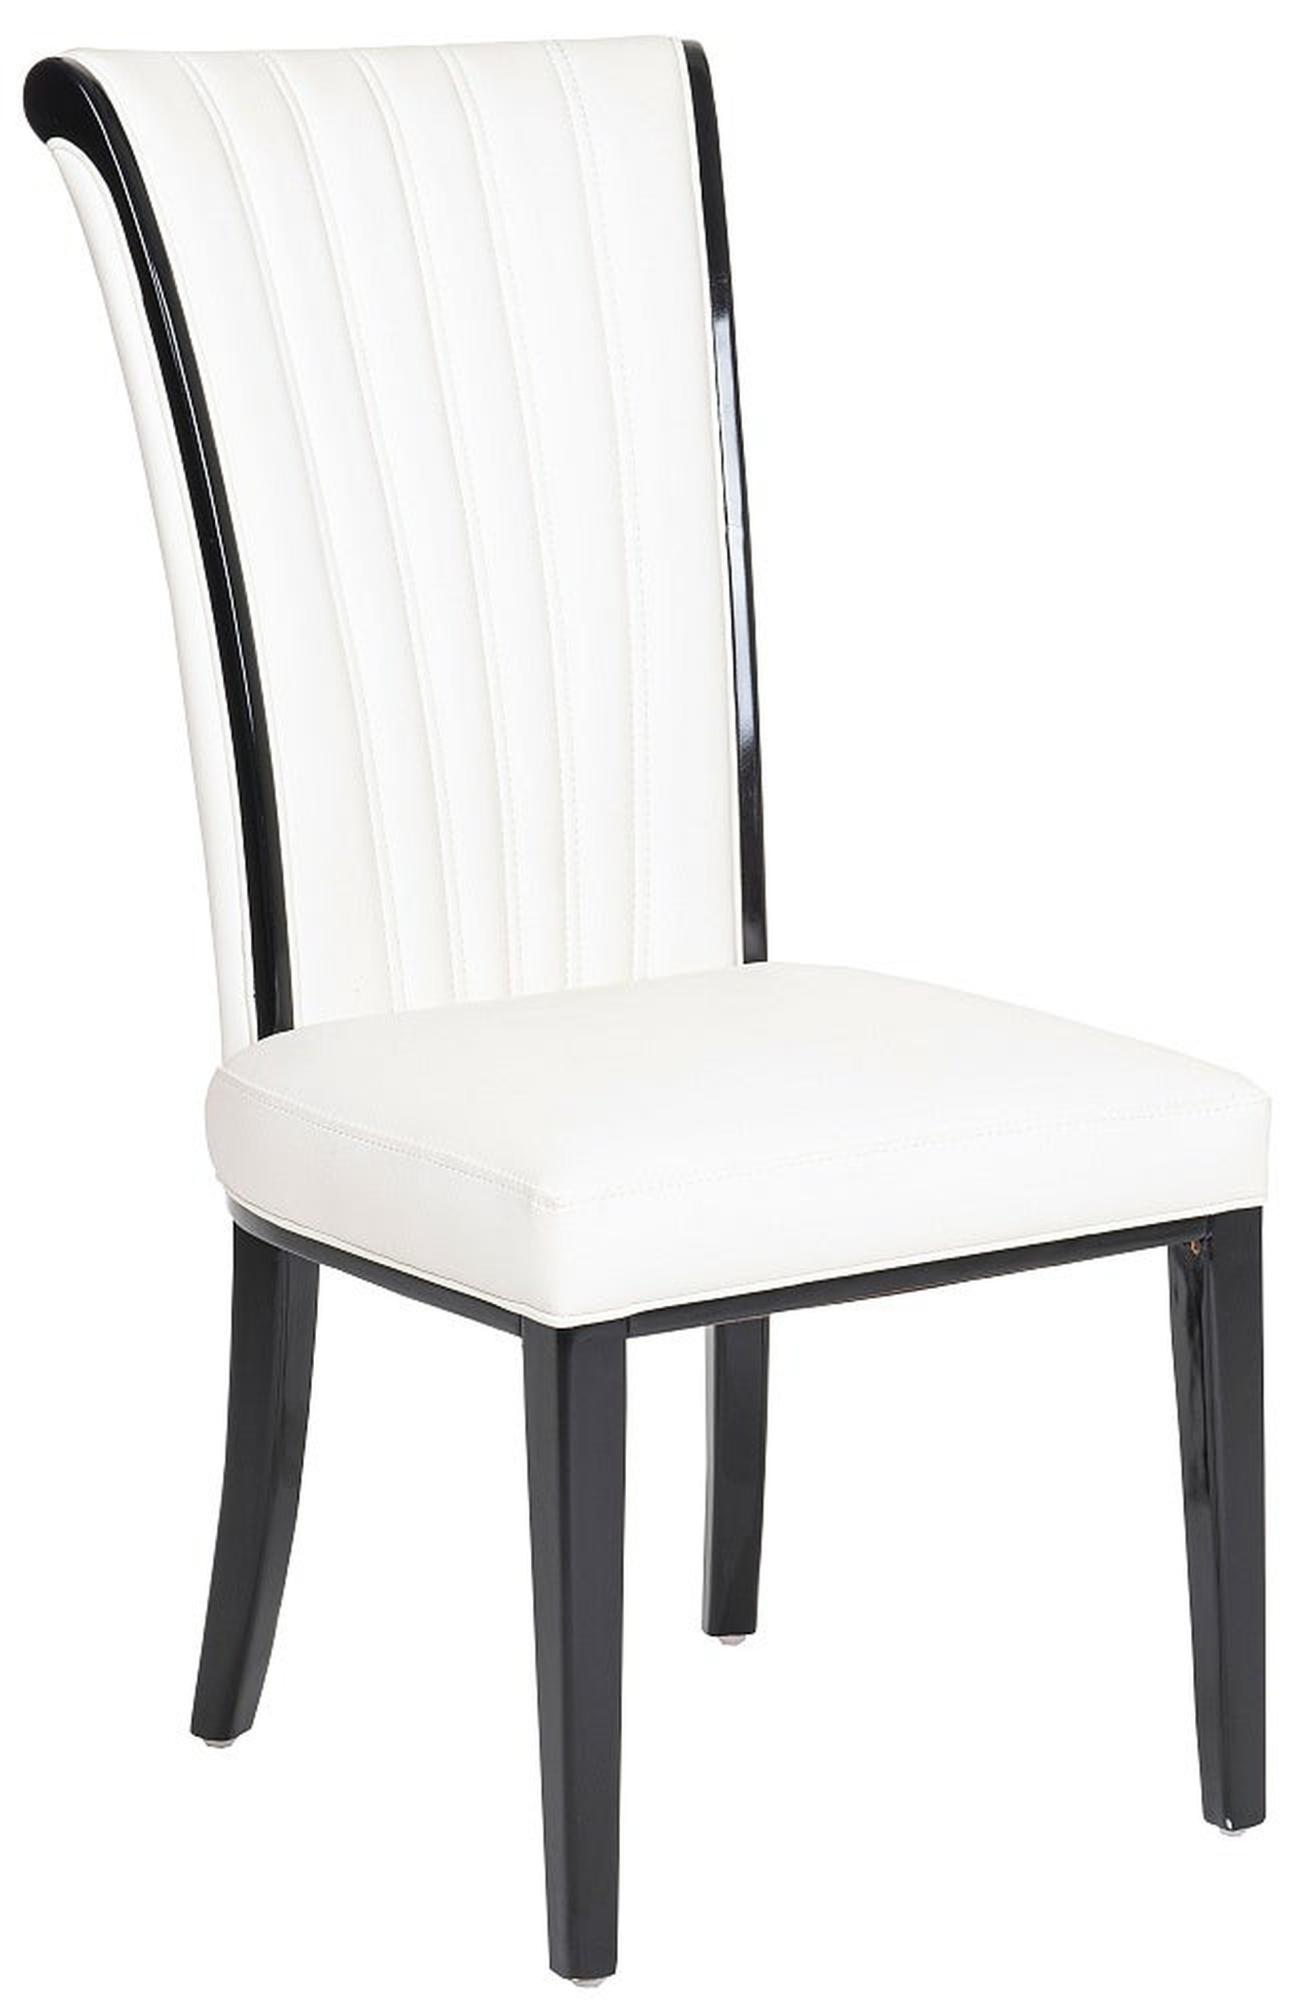 Cadiz White Dining Chair, Leather - Faux PU with Black Legs and High Gloss Side Trims